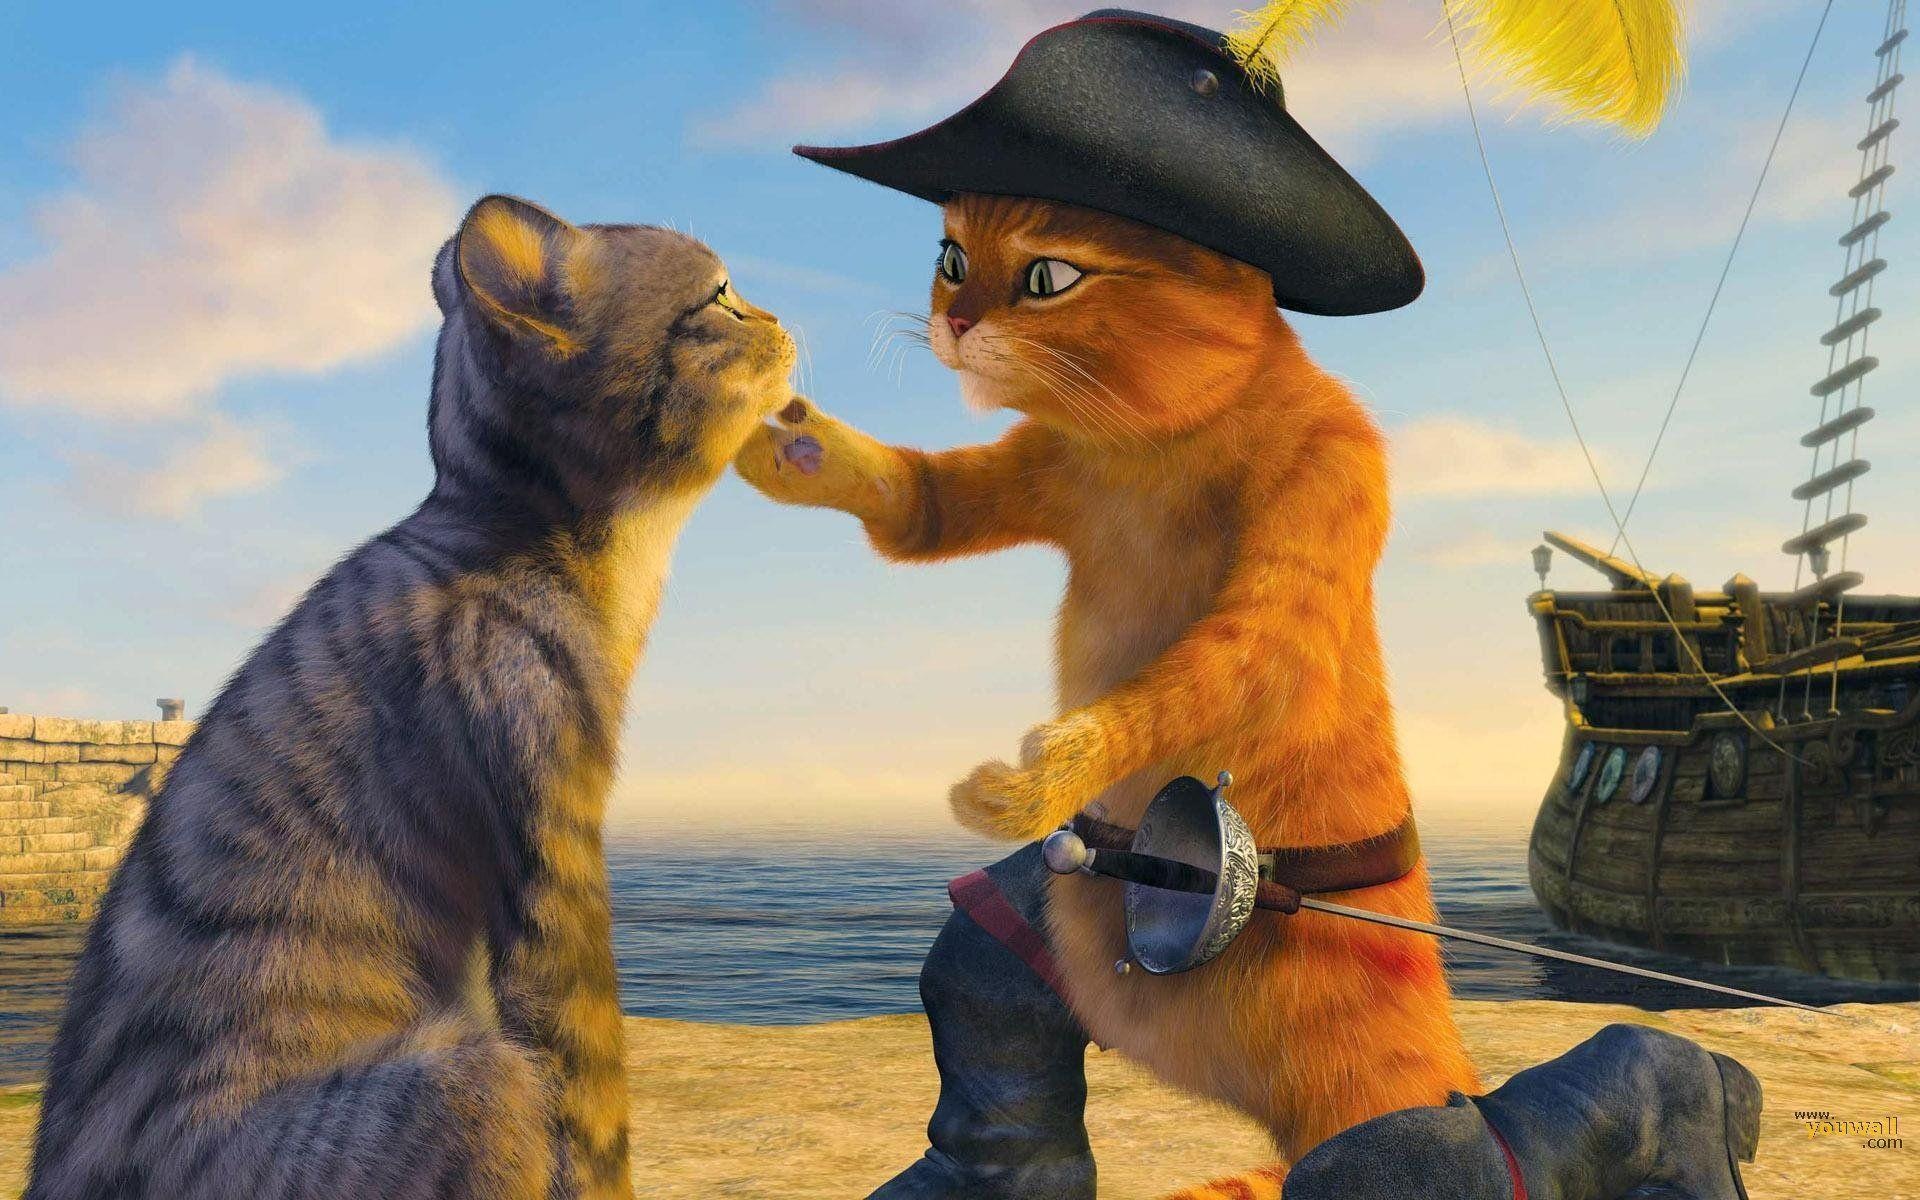 HD wallpaper, Puss In Boots, Puss In Boots Wallpapers, Desktop Hd Puss In Boots The Last Wish Background, The Last Wish Animation, Animated Comedy, 1920X1200 Hd Desktop